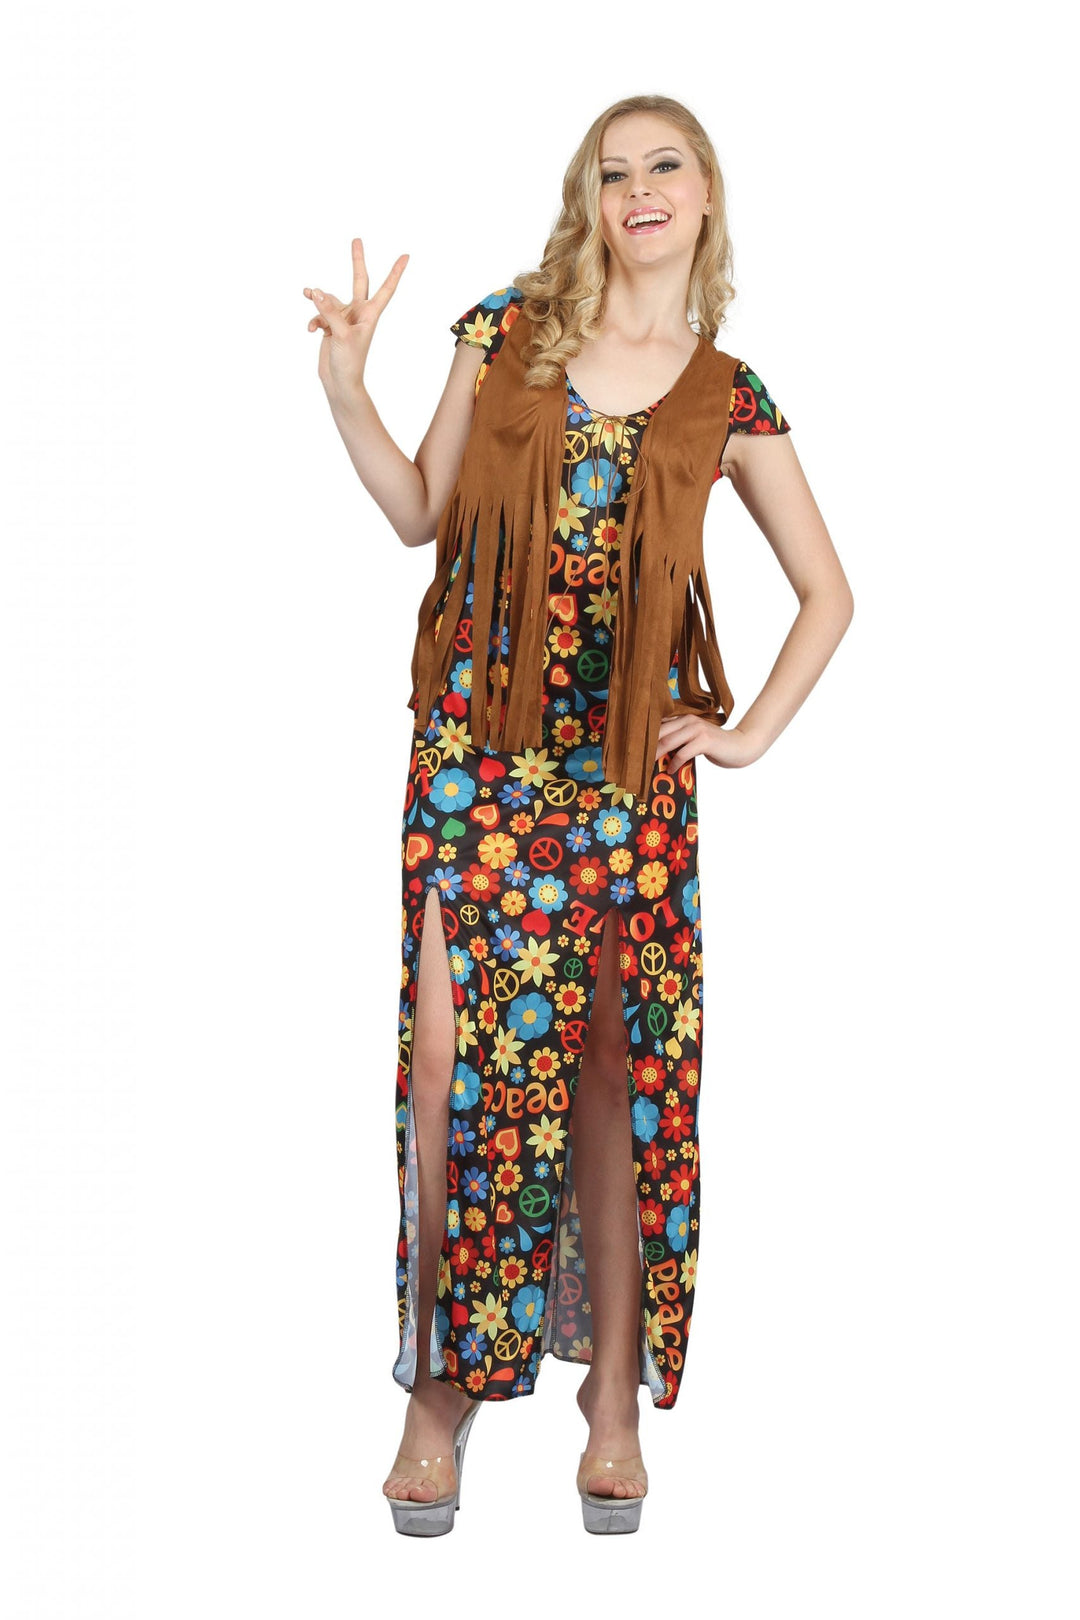 Hippy Dress Costume Floral Woodstock Outfit_1